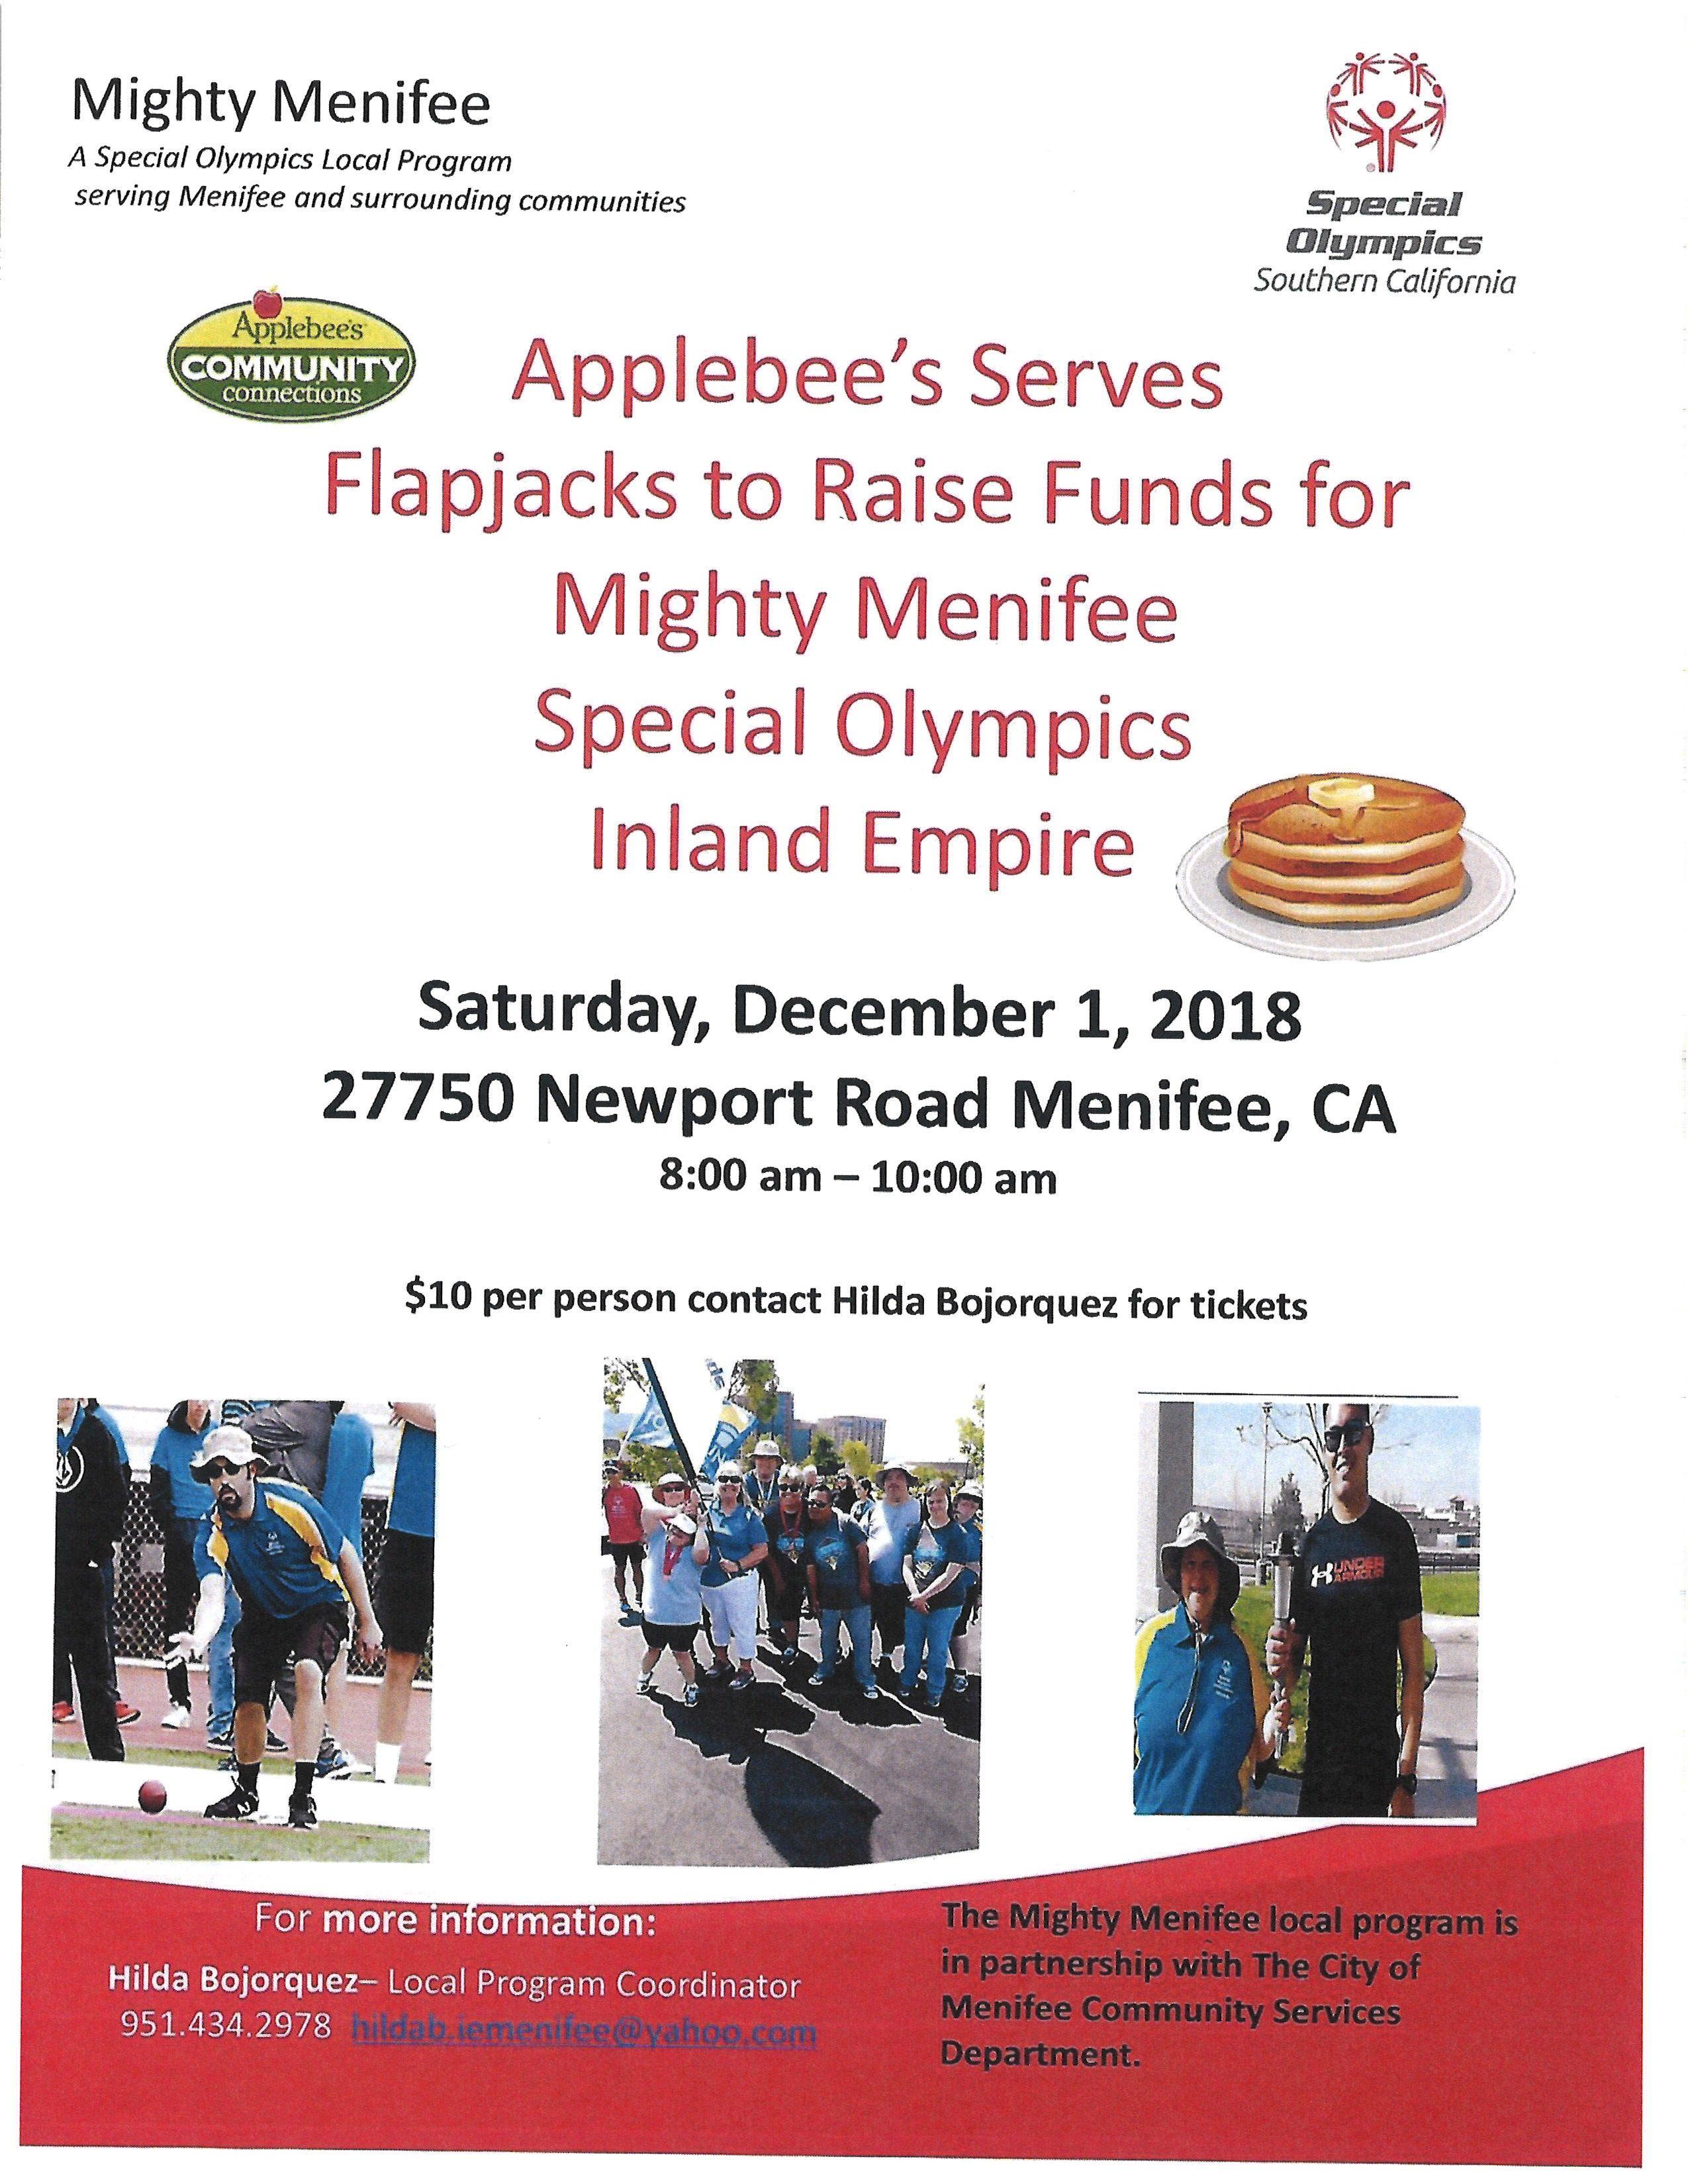 Applebee's Community Connections Logo - IE - Blog - Special Olympics Southern California